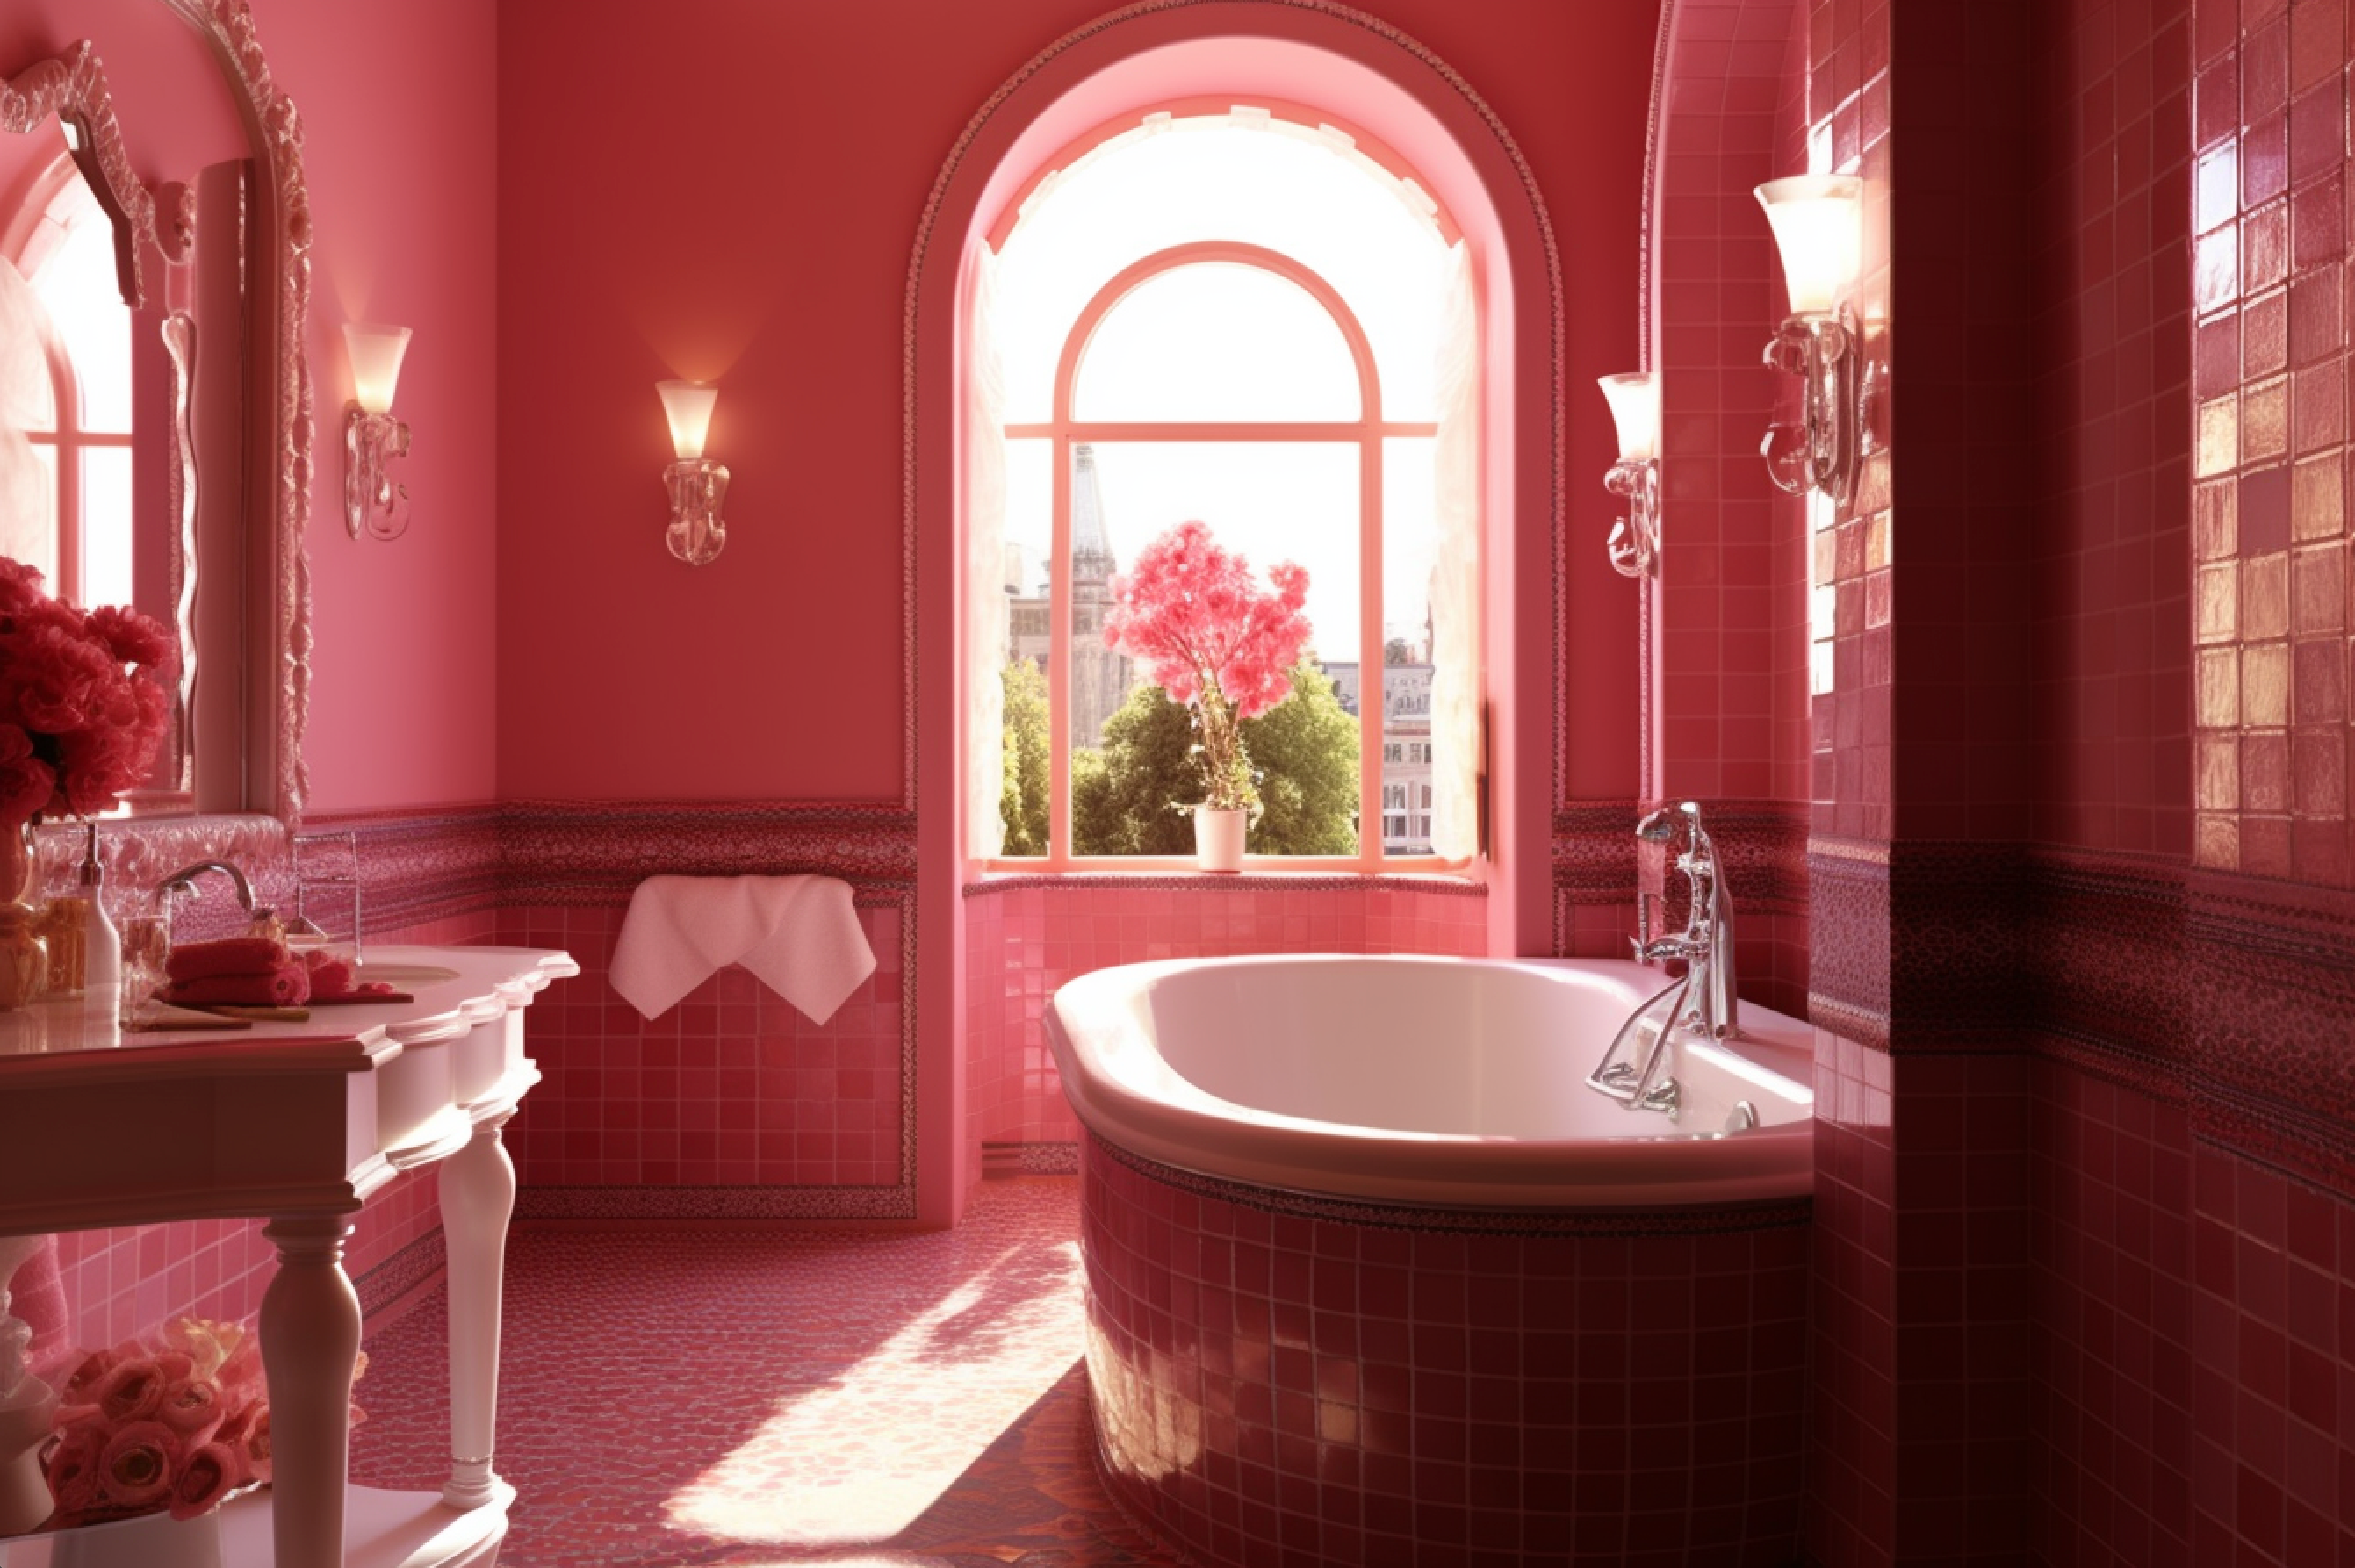 8. Red and Pink Color Scheme - Romantic Bathroom